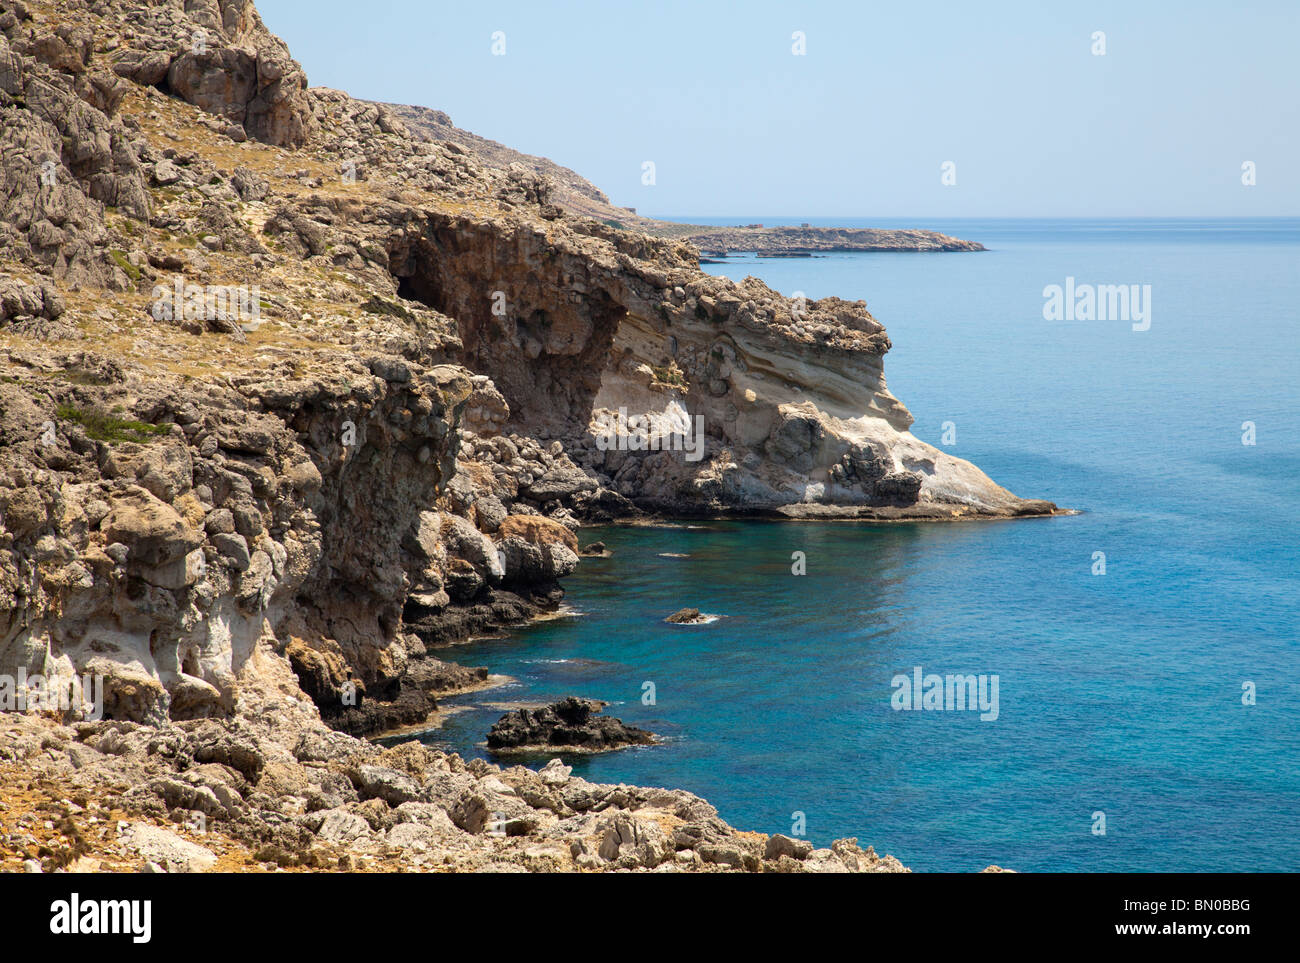 Rocky coastline with natural arch and blue mediterranean waters Stock Photo